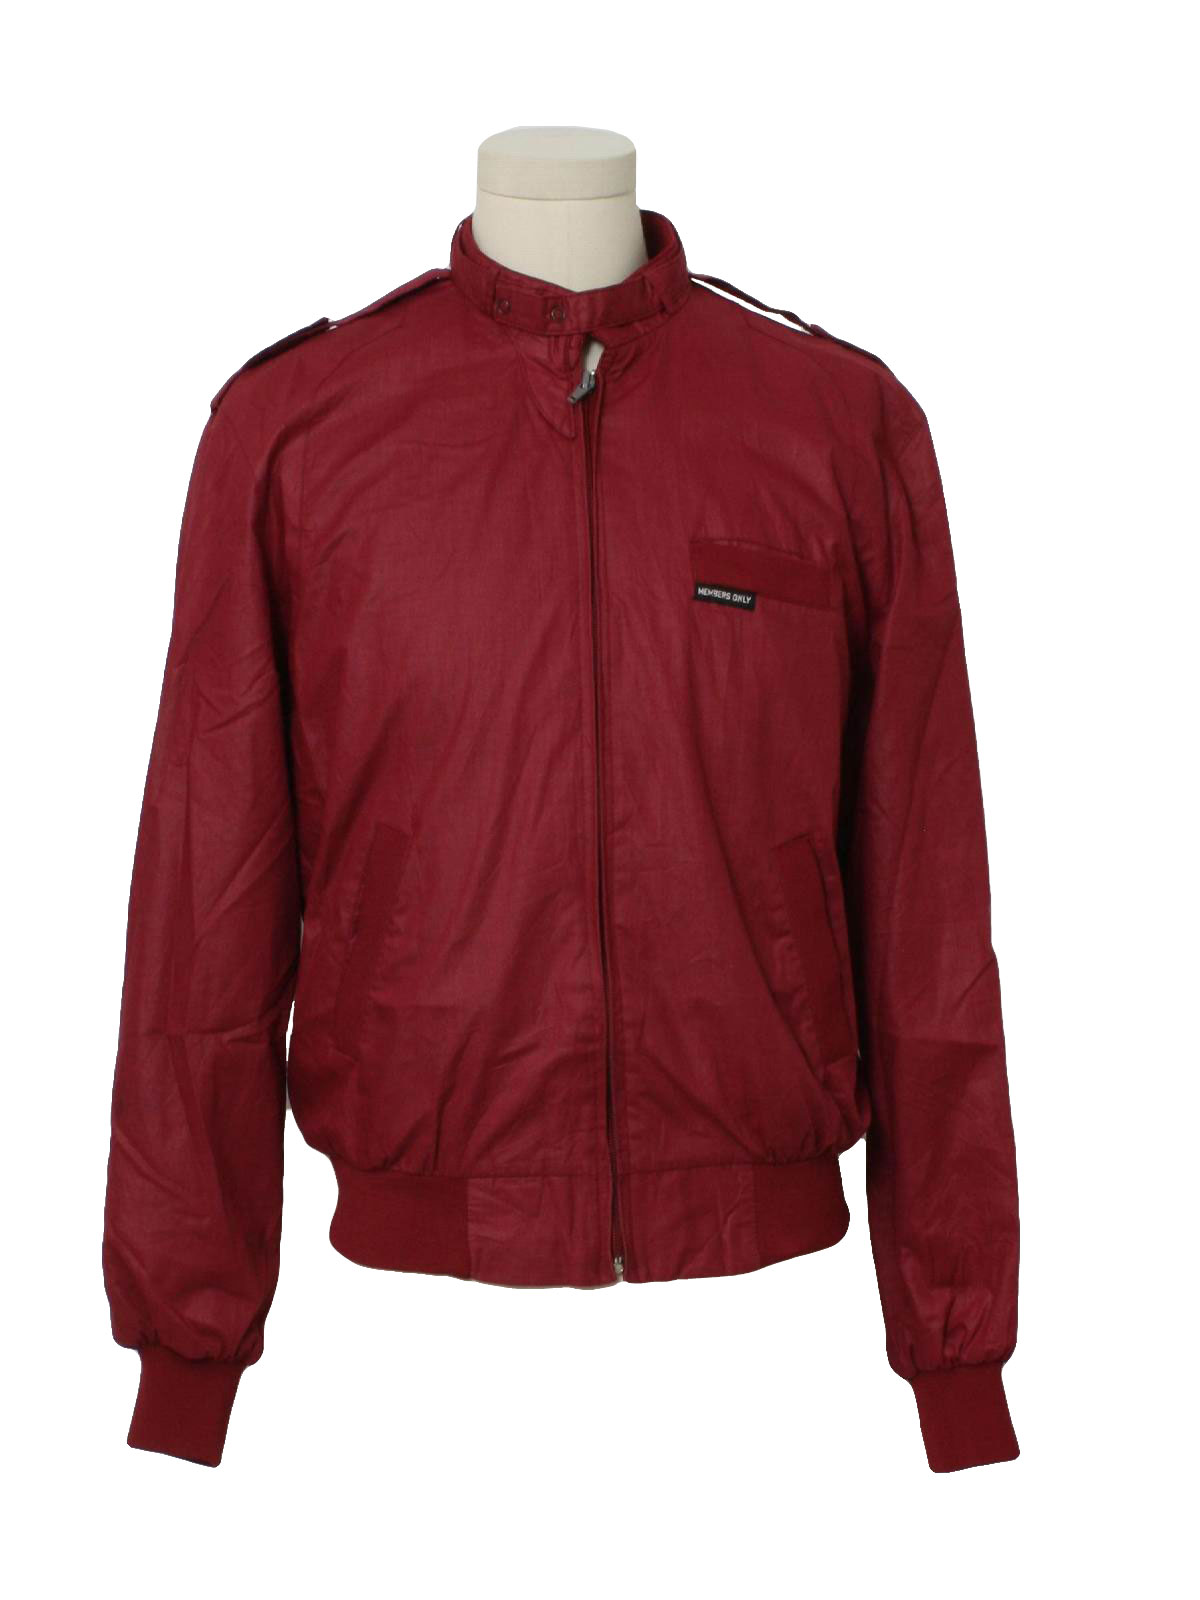 1980's Jacket (Members Only): 80s -Members Only- Mens burgundy cotton ...